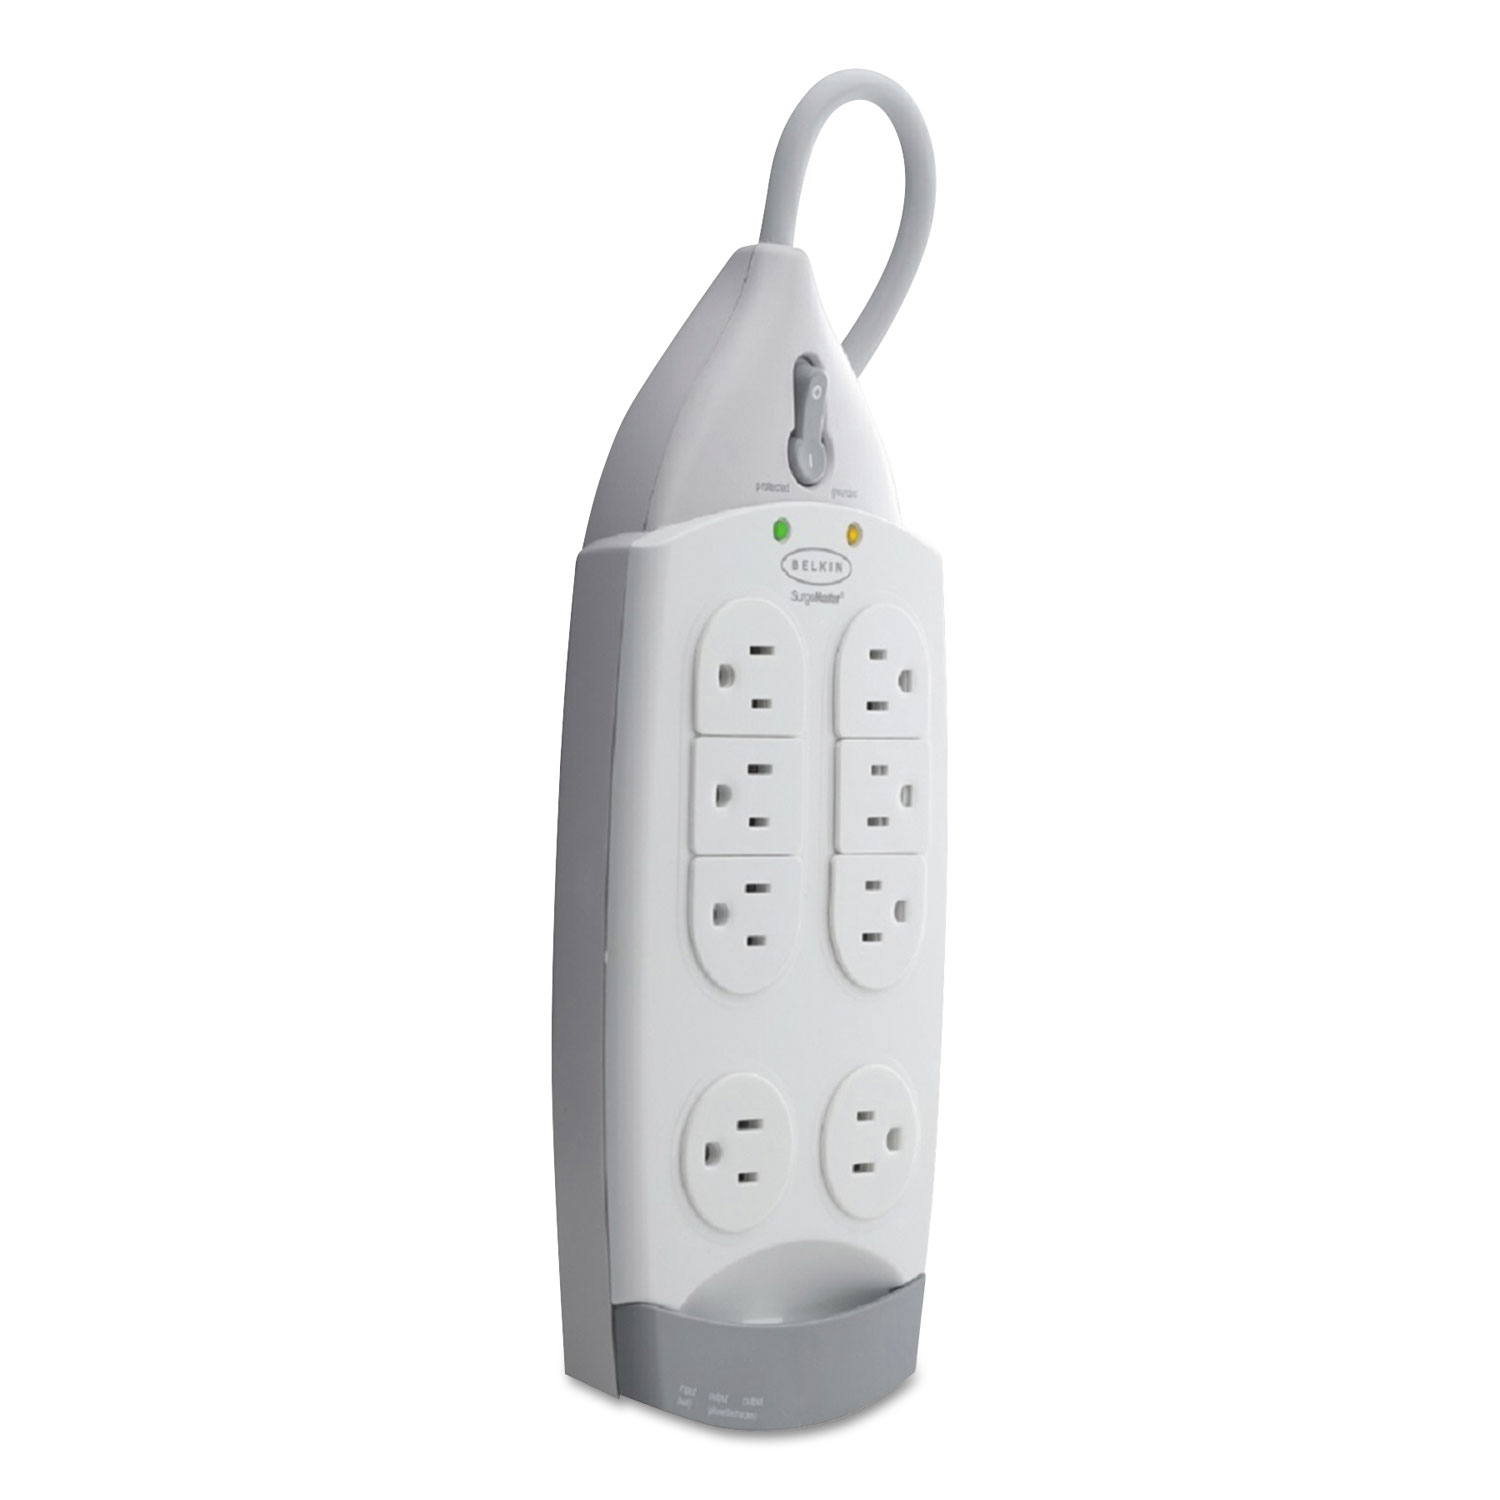 SurgeMaster Home Series Surge Protector, 7 Outlets, 6 ft Cord, 1045 J, White